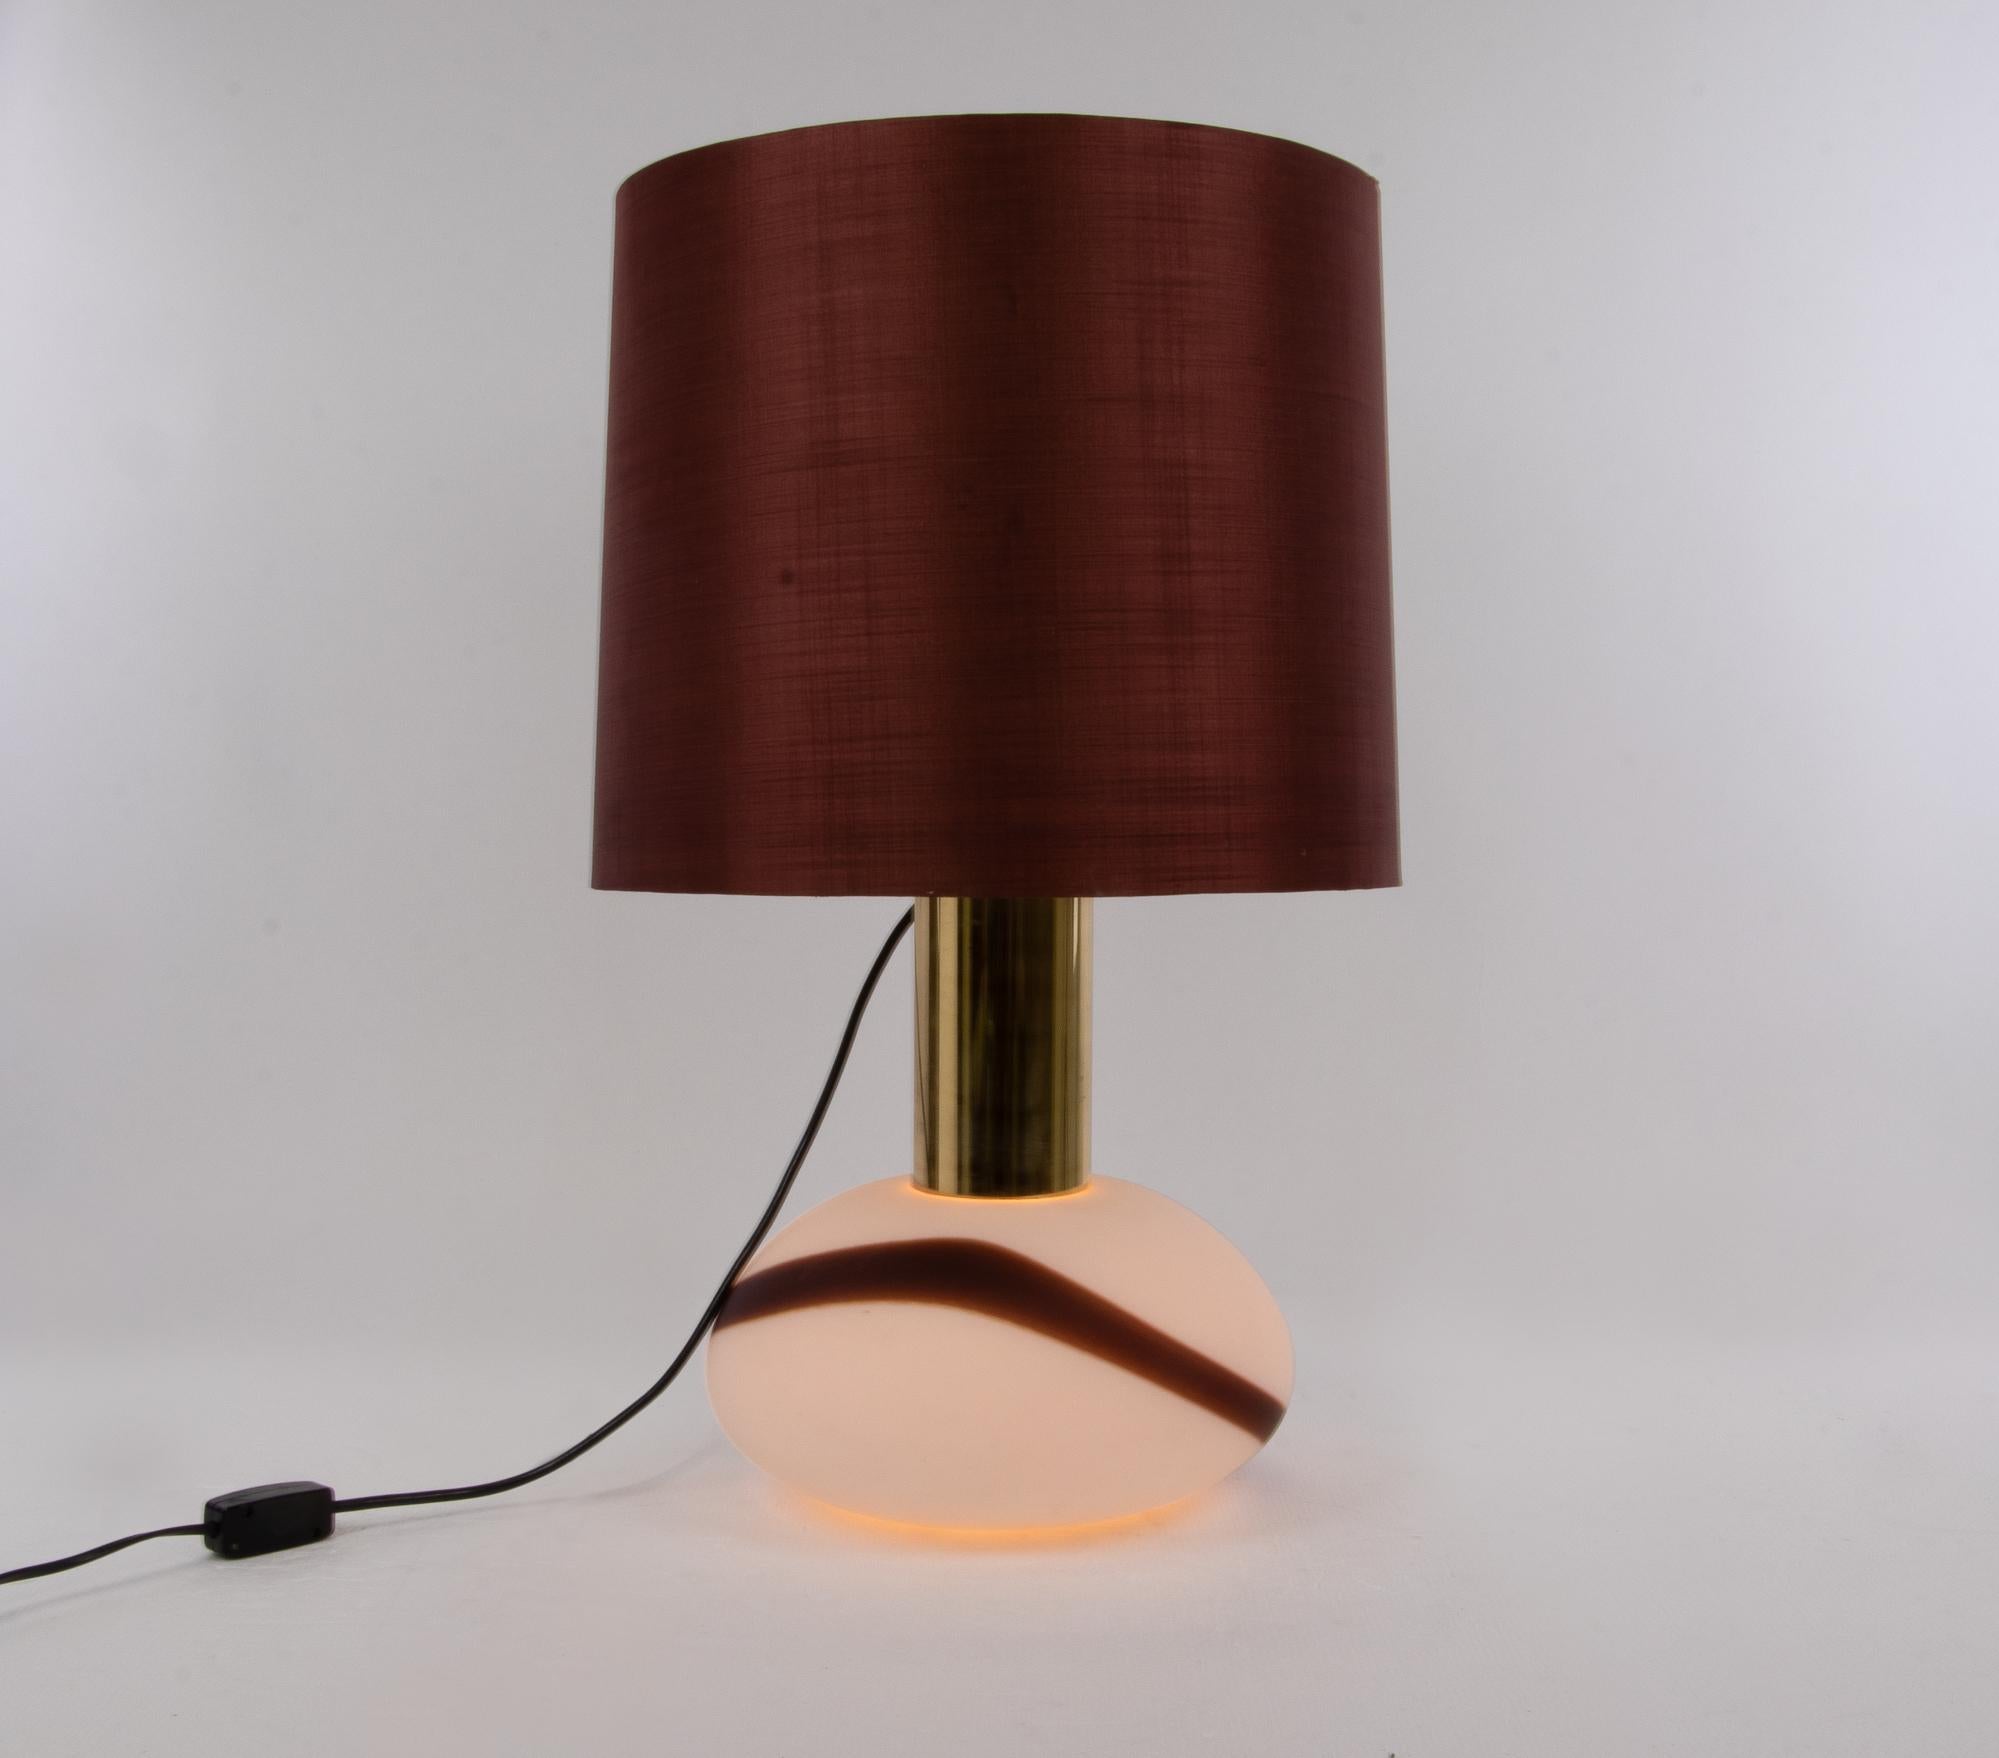 Elegant vintage design table lamp with white Murano glass body with color accents on brass base. The light bulbs can be switched separately (0-1-2-1-0). The lamp shade is made of fabric. Manufactured by the German/Swiss company Temde Leuchten in the